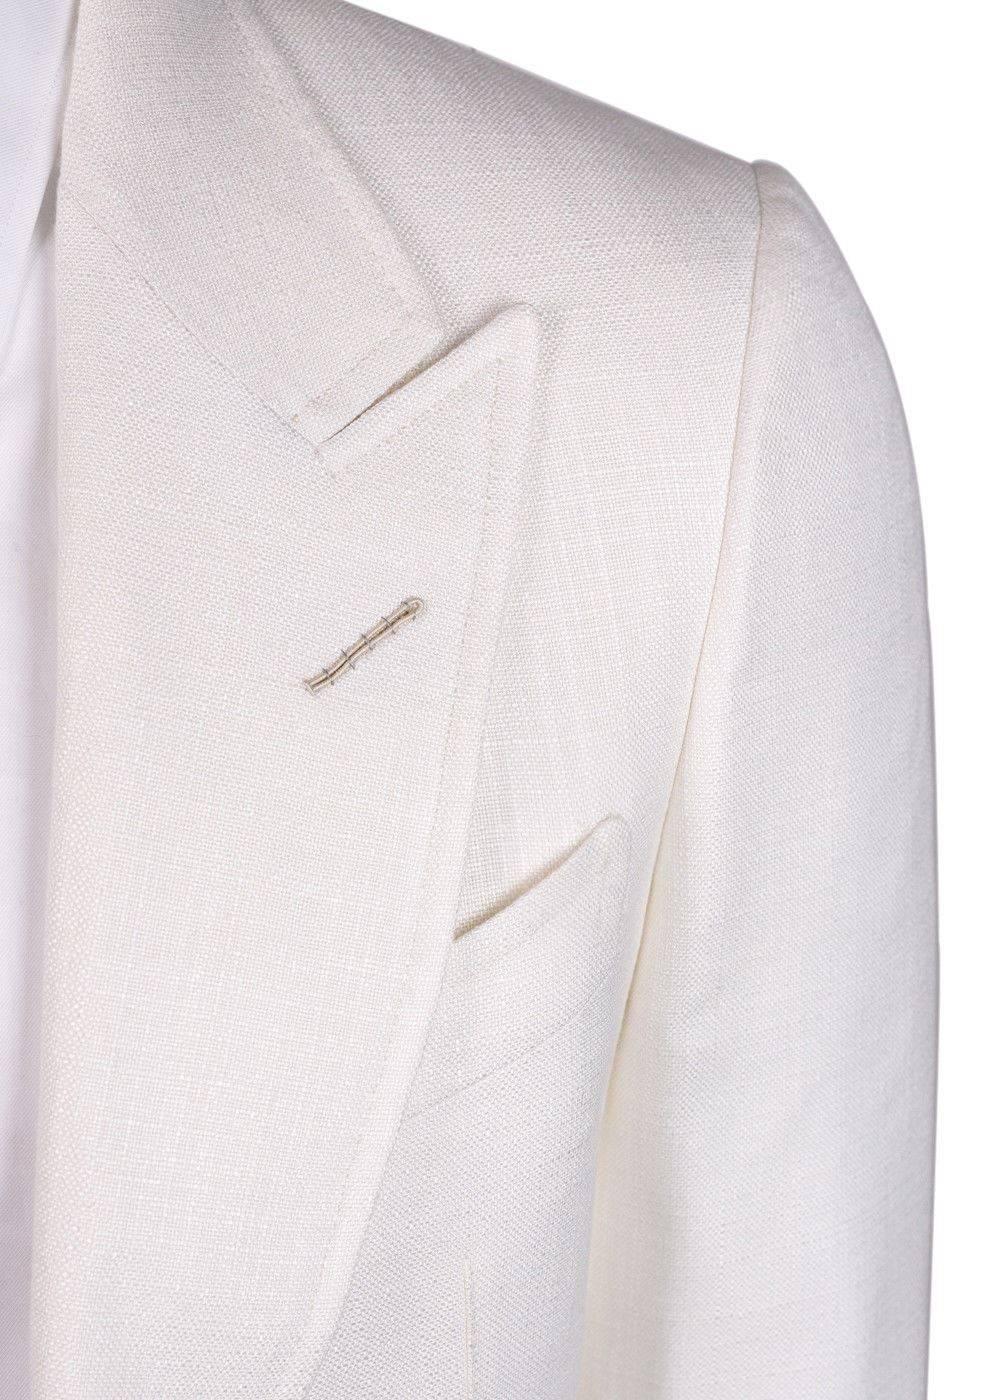 Brand New Tom Ford Two-Piece Shelton Base Suit
Original Tags & Hanger Included
Retails In-Store & Online for $3750
IT 46R/ US 36

Channel the look of a modern gentleman with Tom Ford's signature Shelton two piece suit. Classic and sophisticated, two